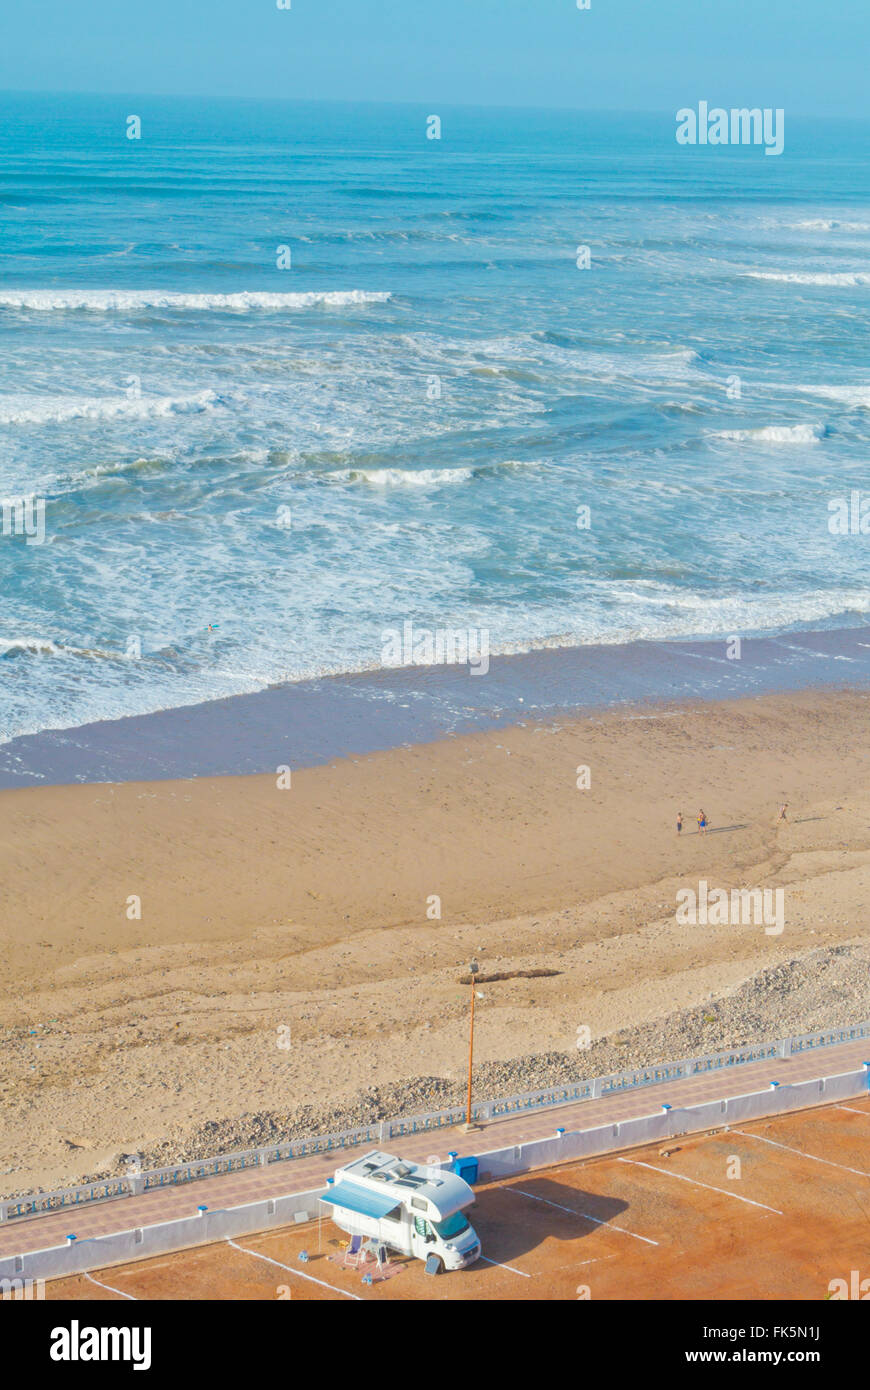 Campervan, beach, Sidi Ifni, Guelmim-Oued region, southern Morocco, northern Africa Stock Photo